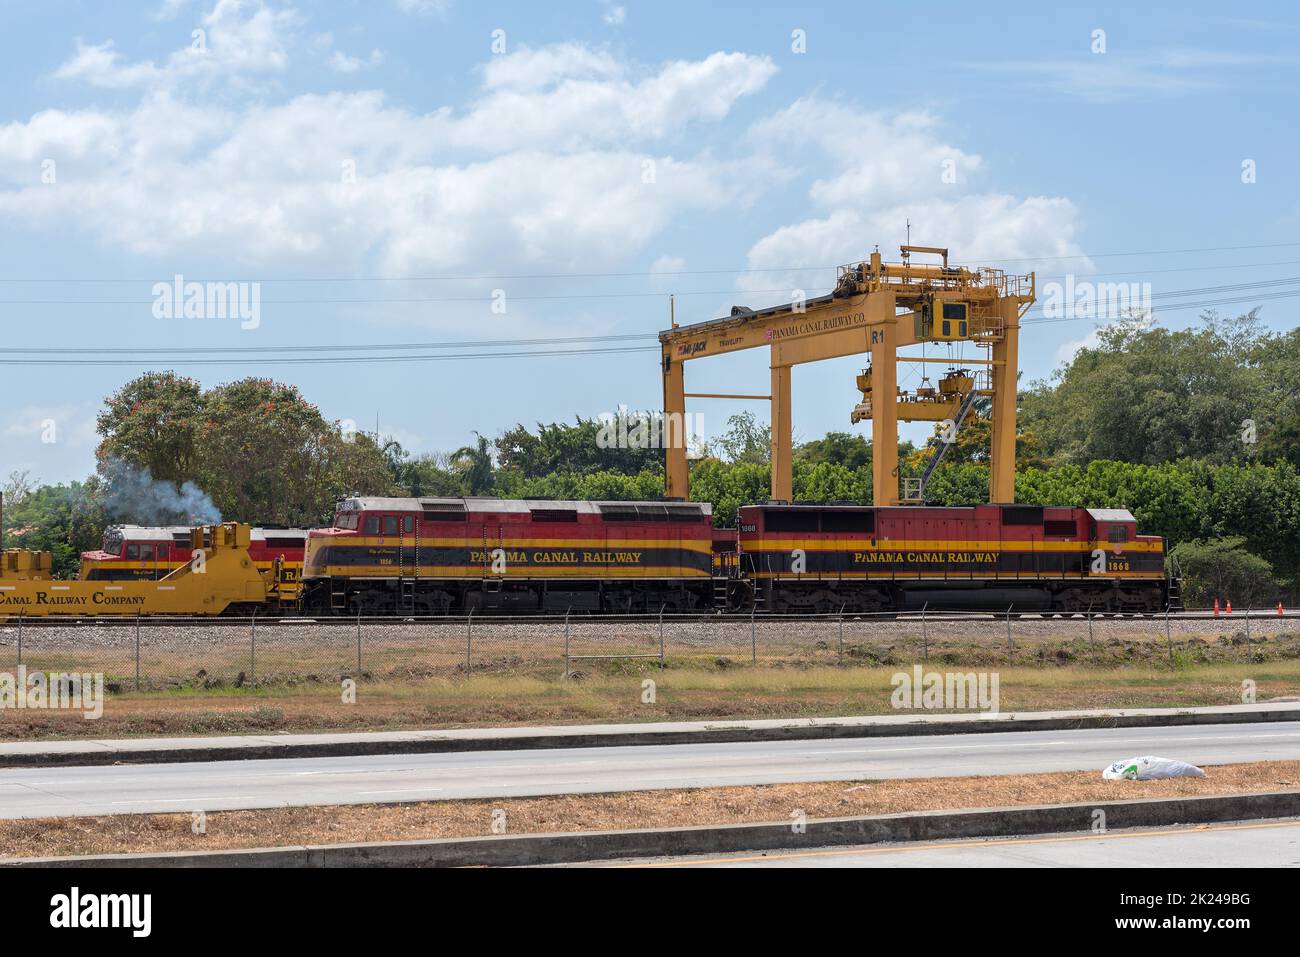 The locomotive of the train of the Panama Canal Railway which connects Panama City and Colon. Stock Photo